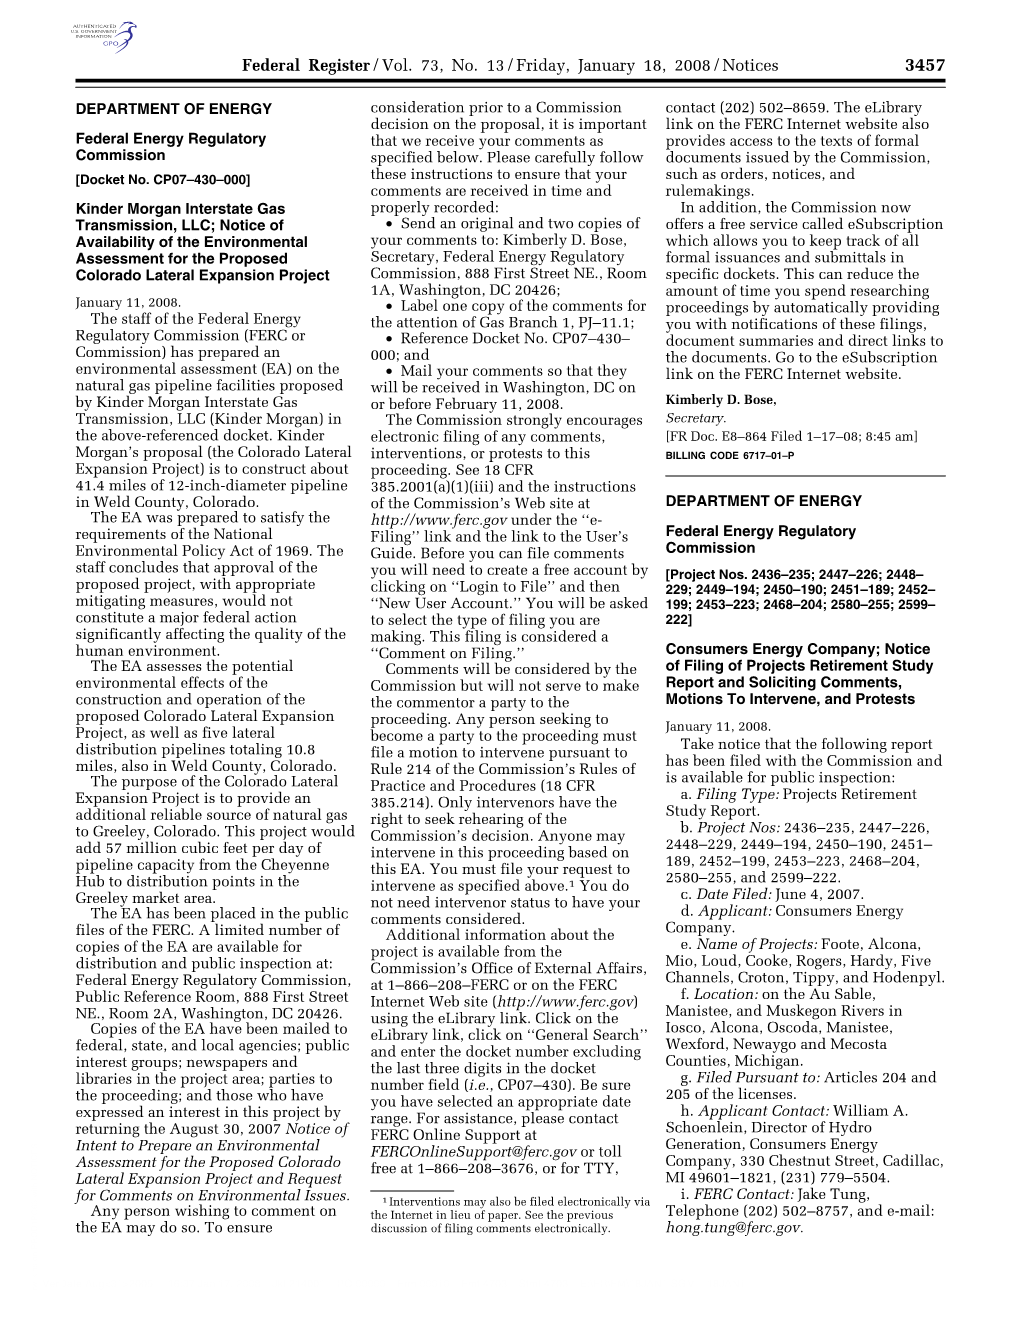 Federal Register/Vol. 73, No. 13/Friday, January 18, 2008/Notices